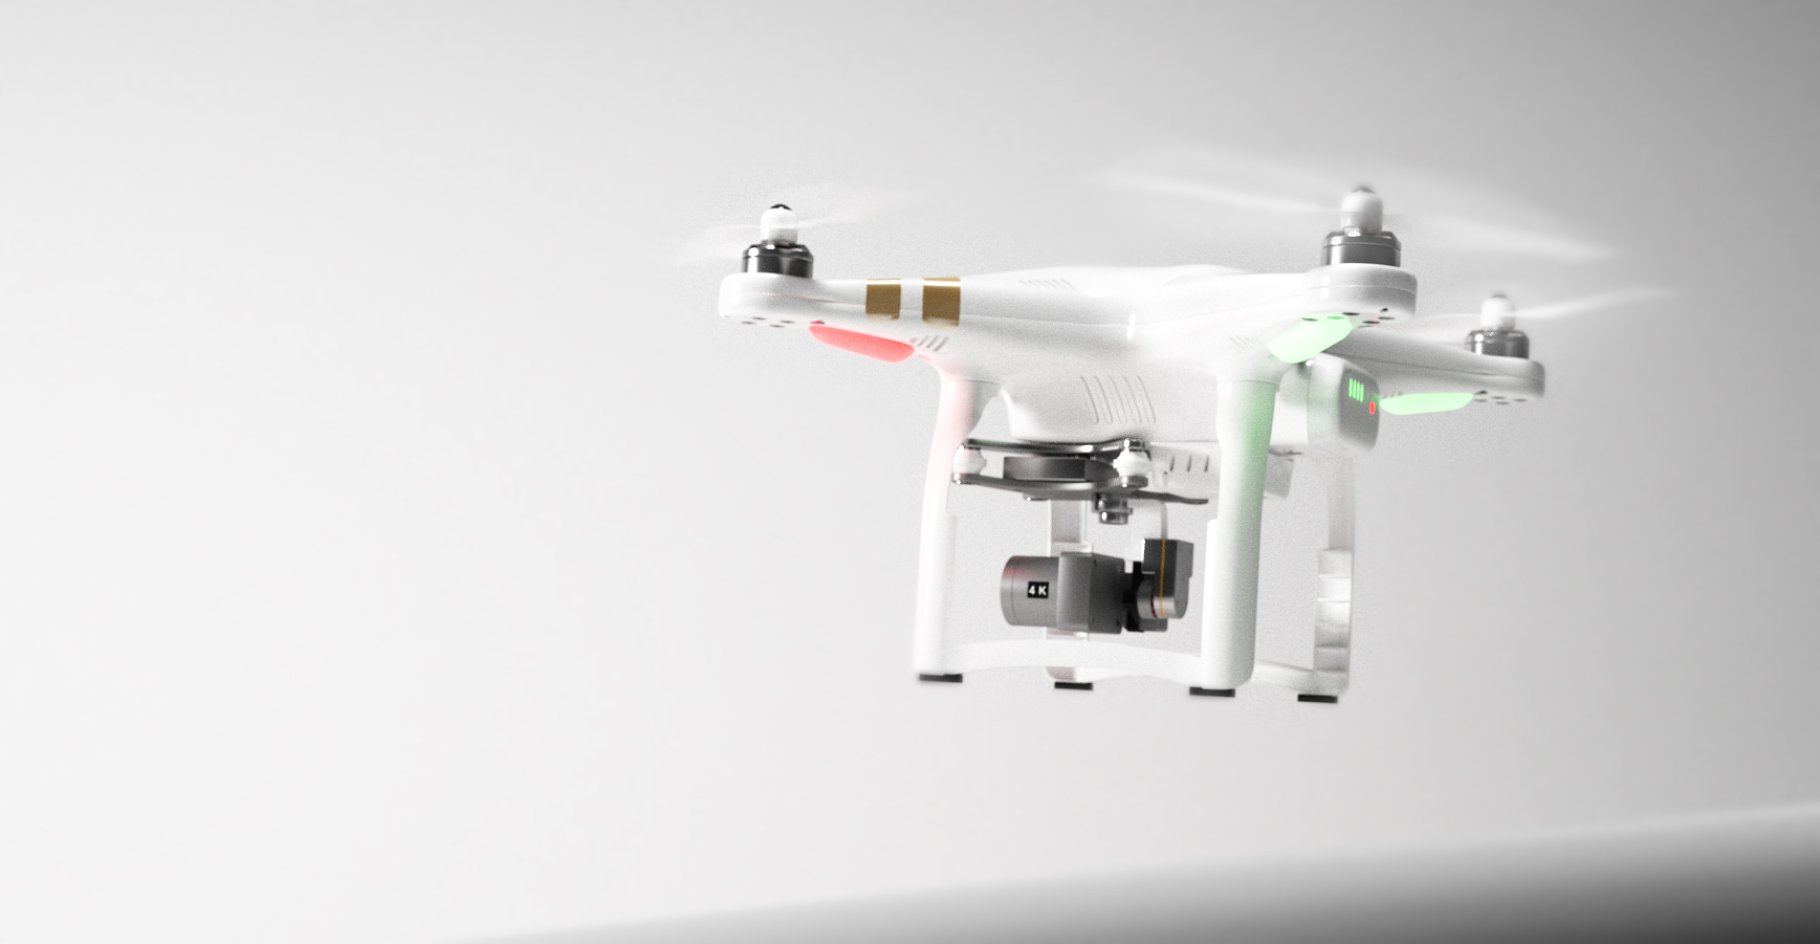 Colorful rendering of a white DJI Phantom 3 drone